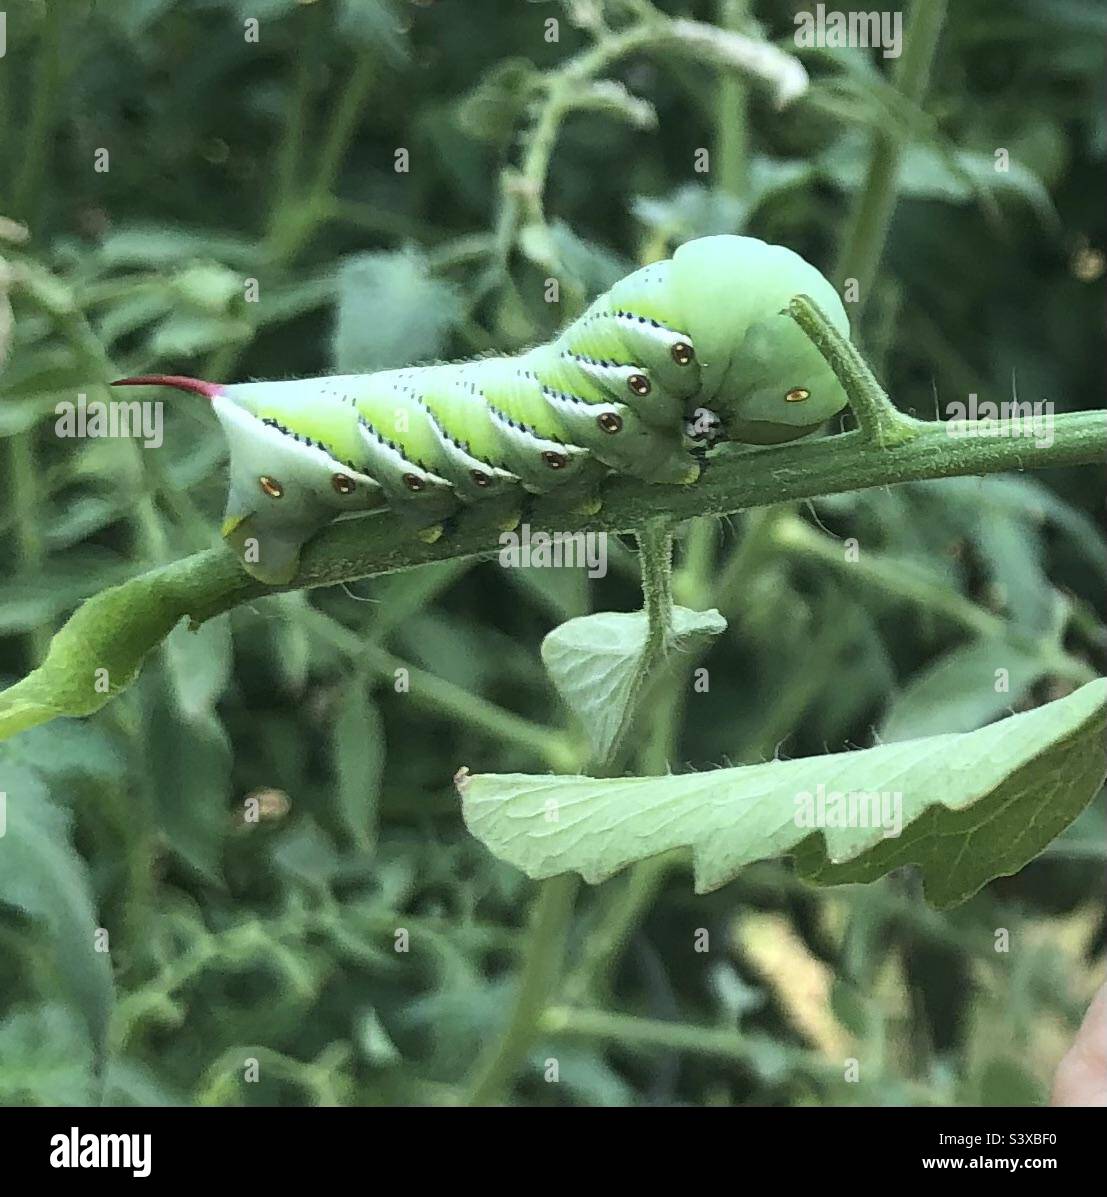 A large green hornworm on a tomato bush Stock Photo